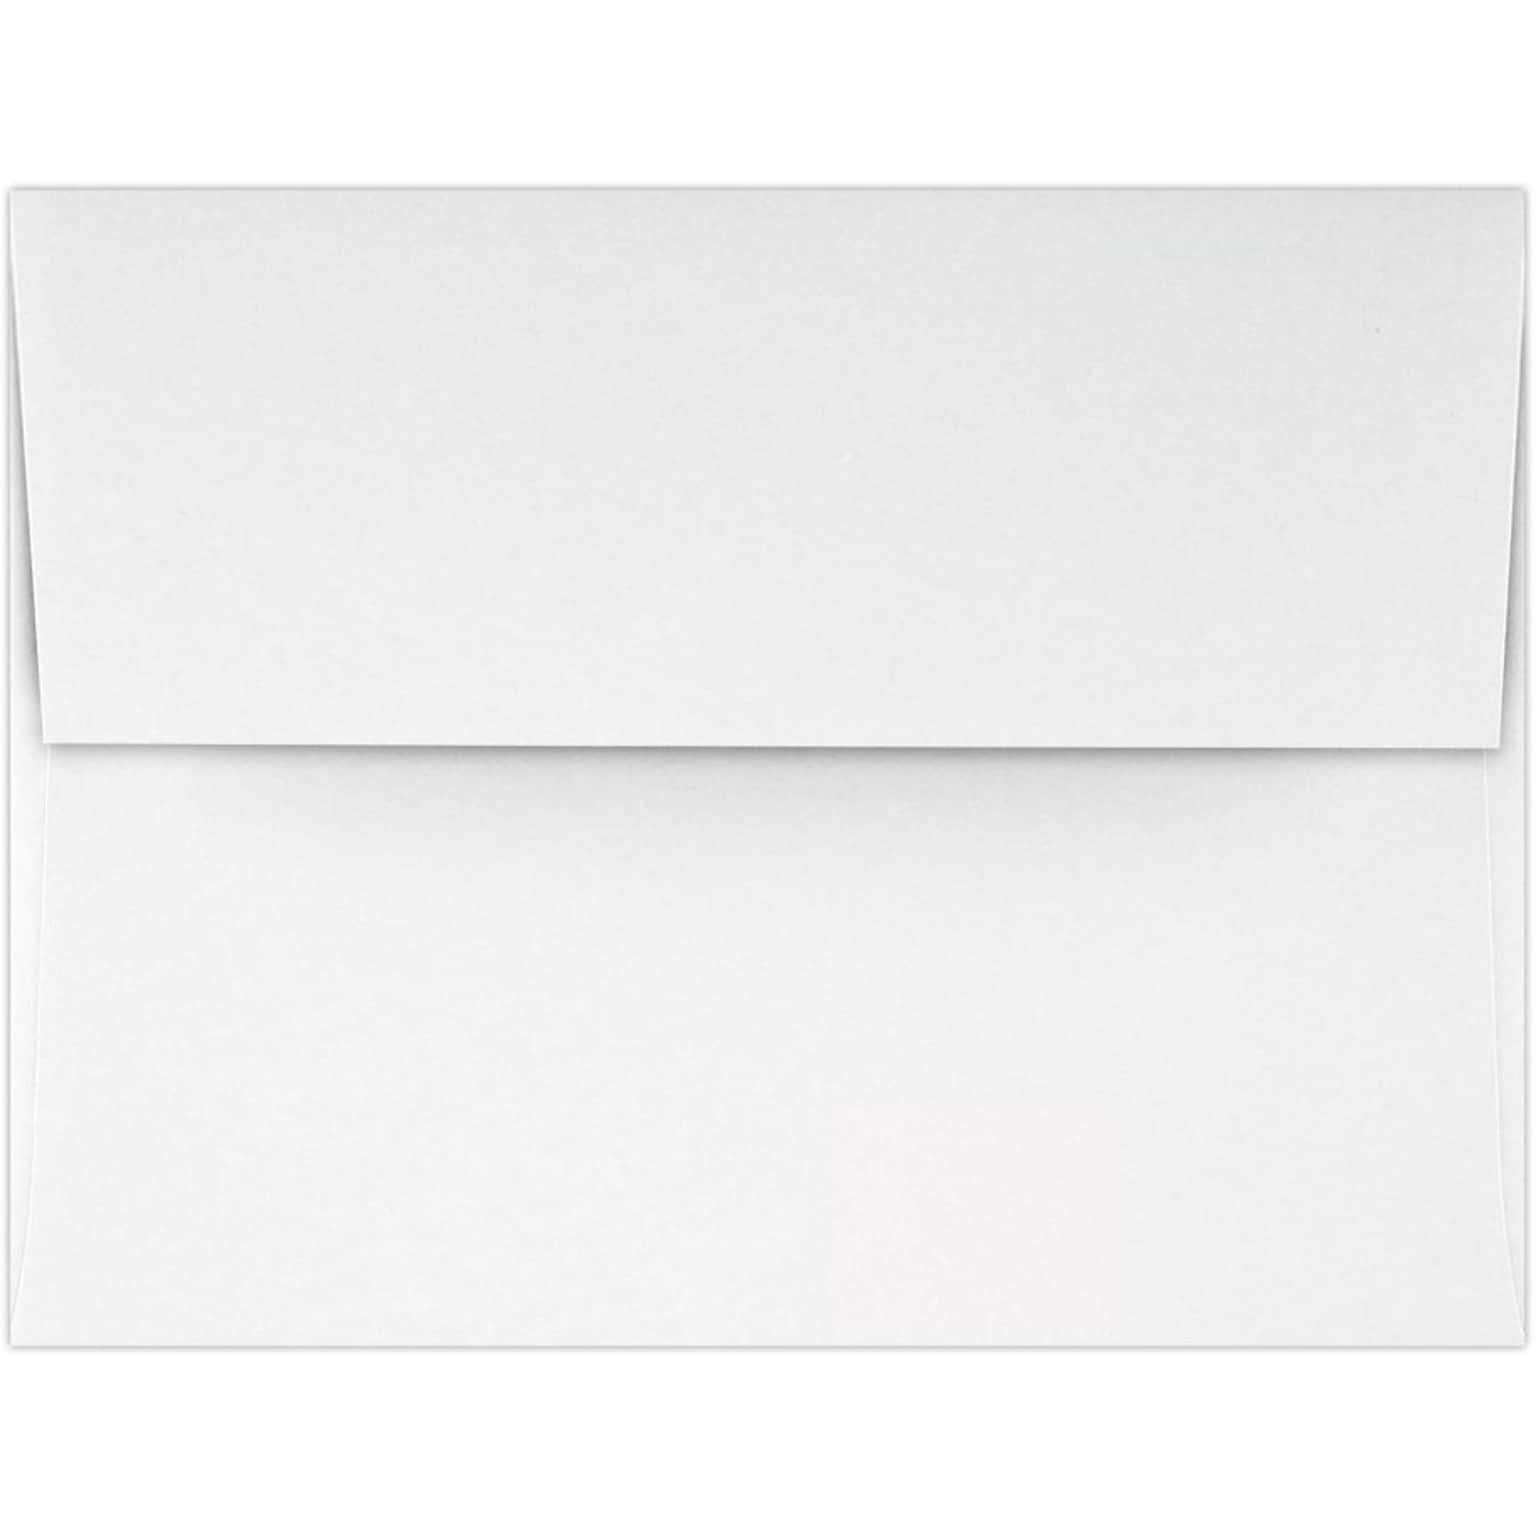 LUX A2 Invitation Envelopes (4 3/8 x 5 3/4) 250/Pack, 70lb. Classic Linen® Bright White - 100% Recycled (870-70RBWLI-250)